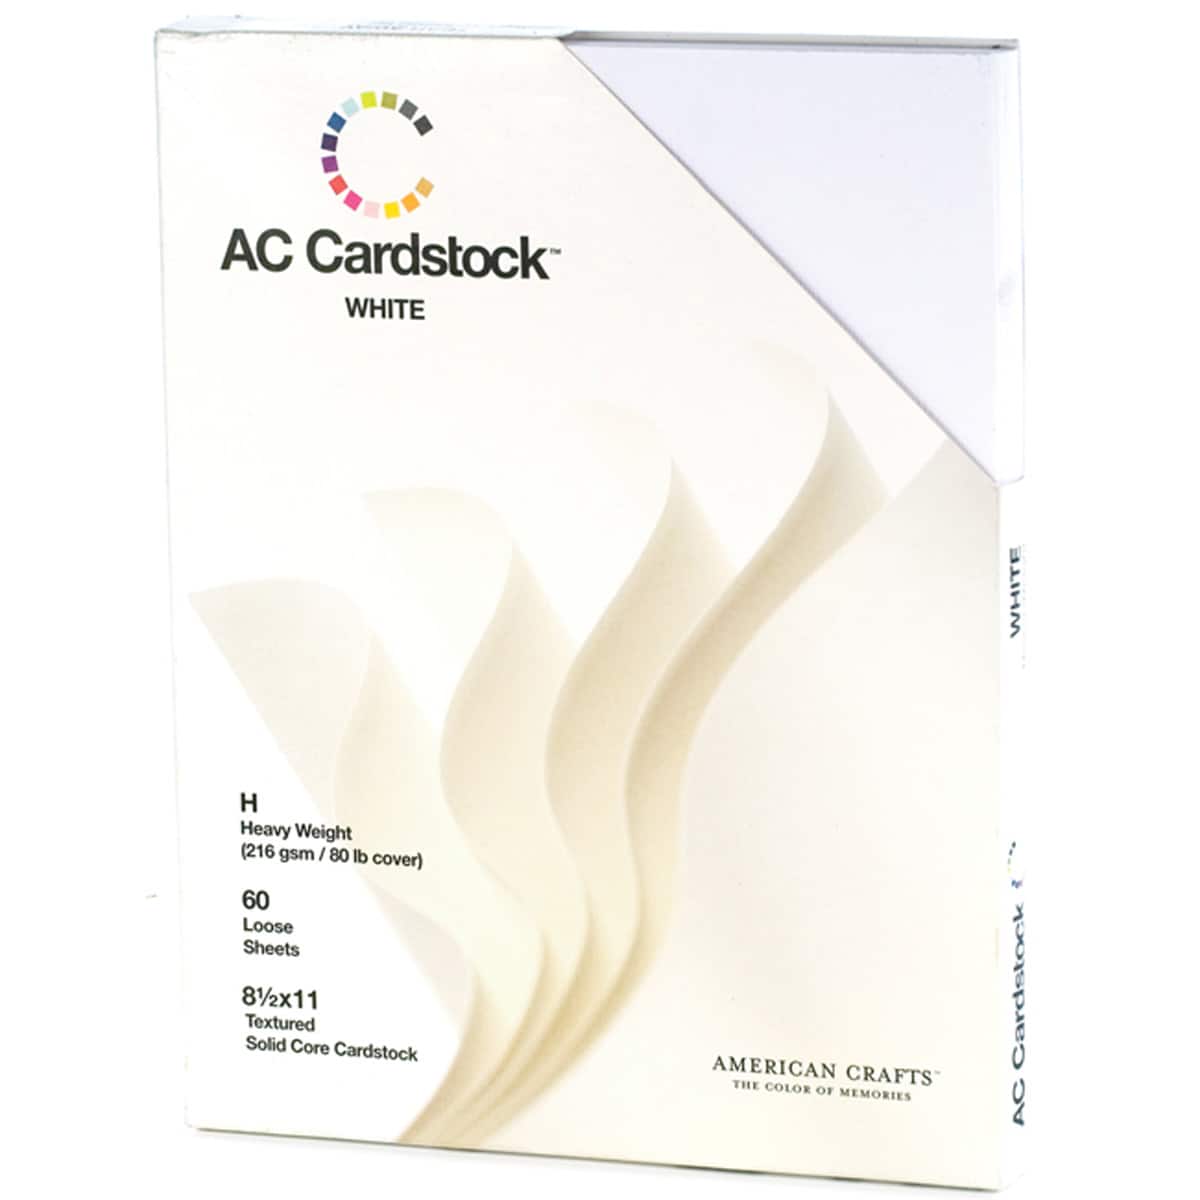 Silk White Cardstock - 8.5 x 11 inch - 65Lb Cover - 50 Sheets - Clear Path  Paper 